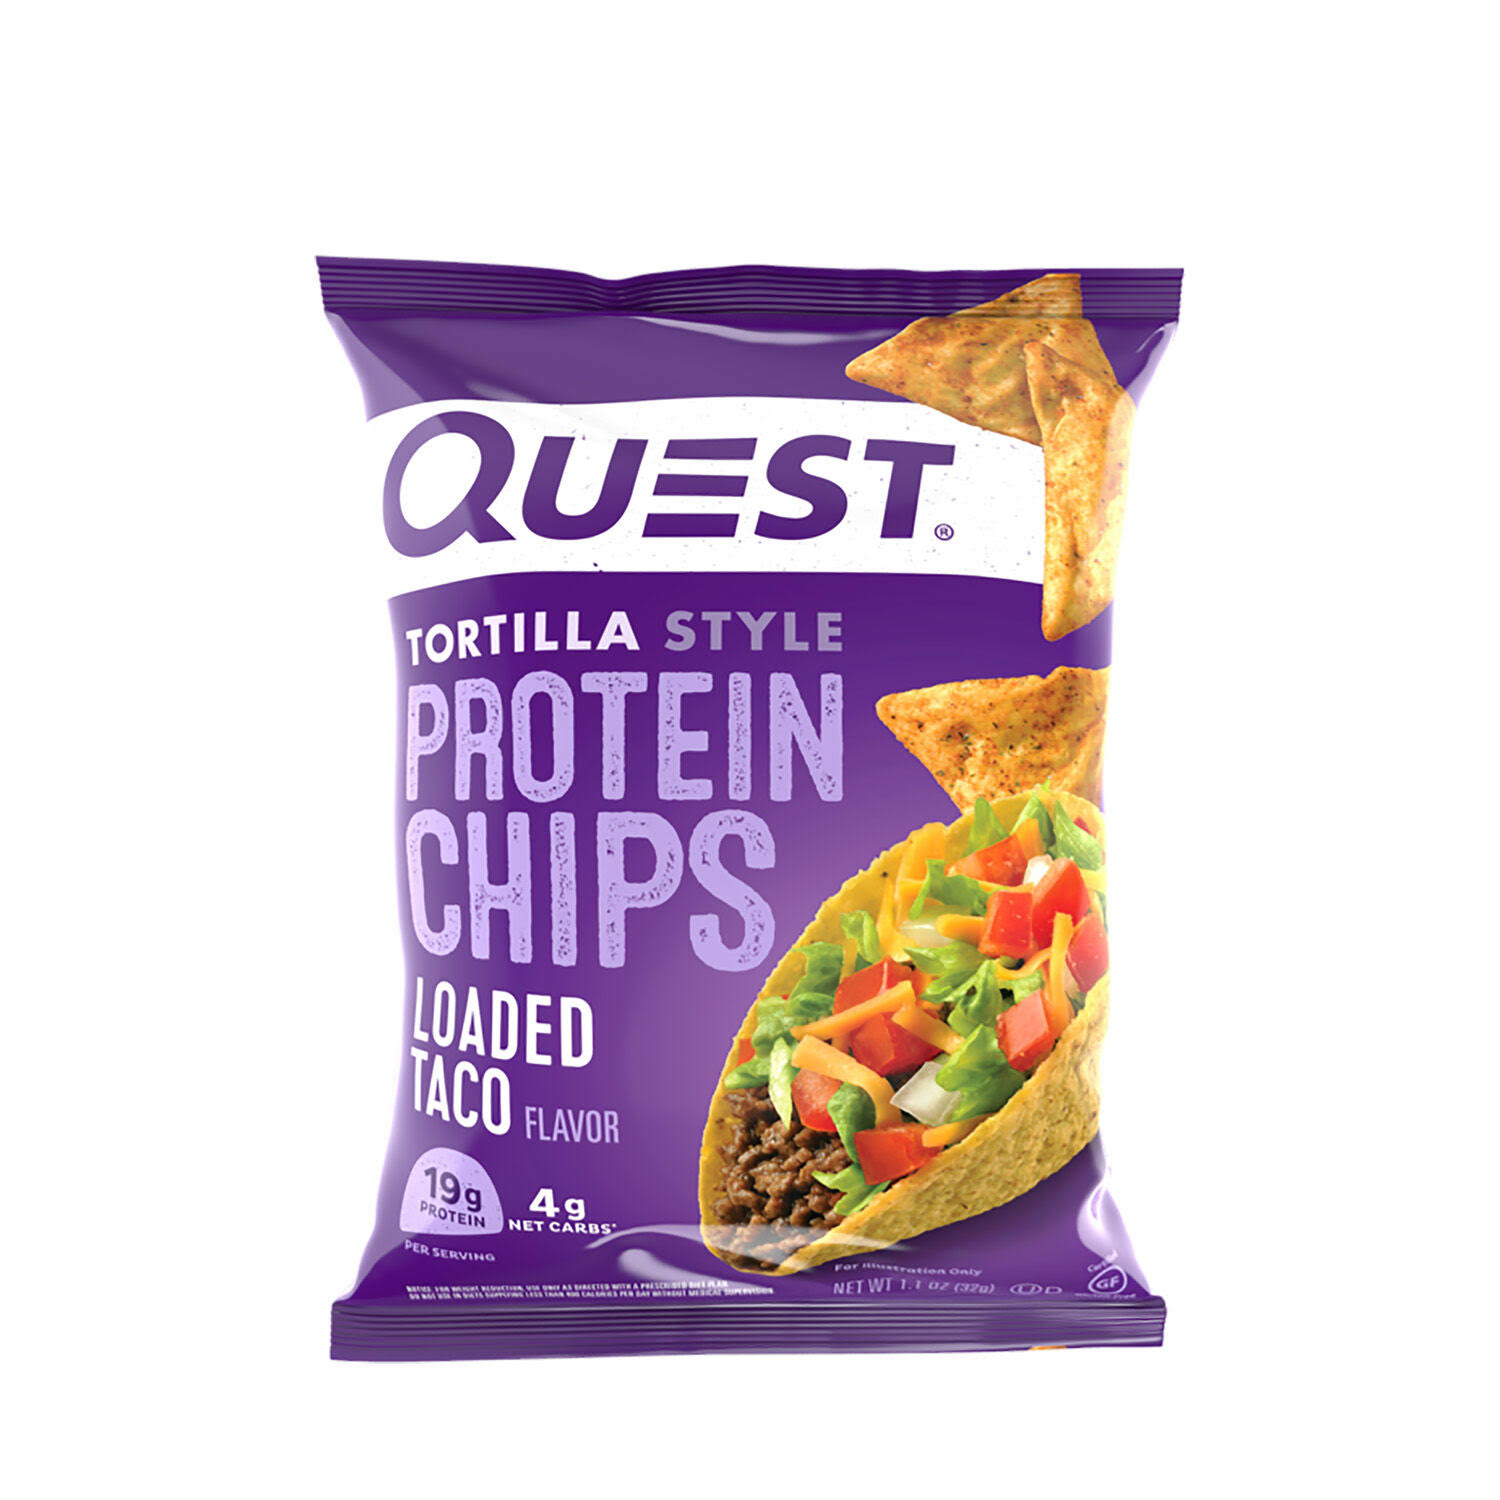 Quest Tortilla Style Protein Chips - Loaded Taco, 8g | GNC